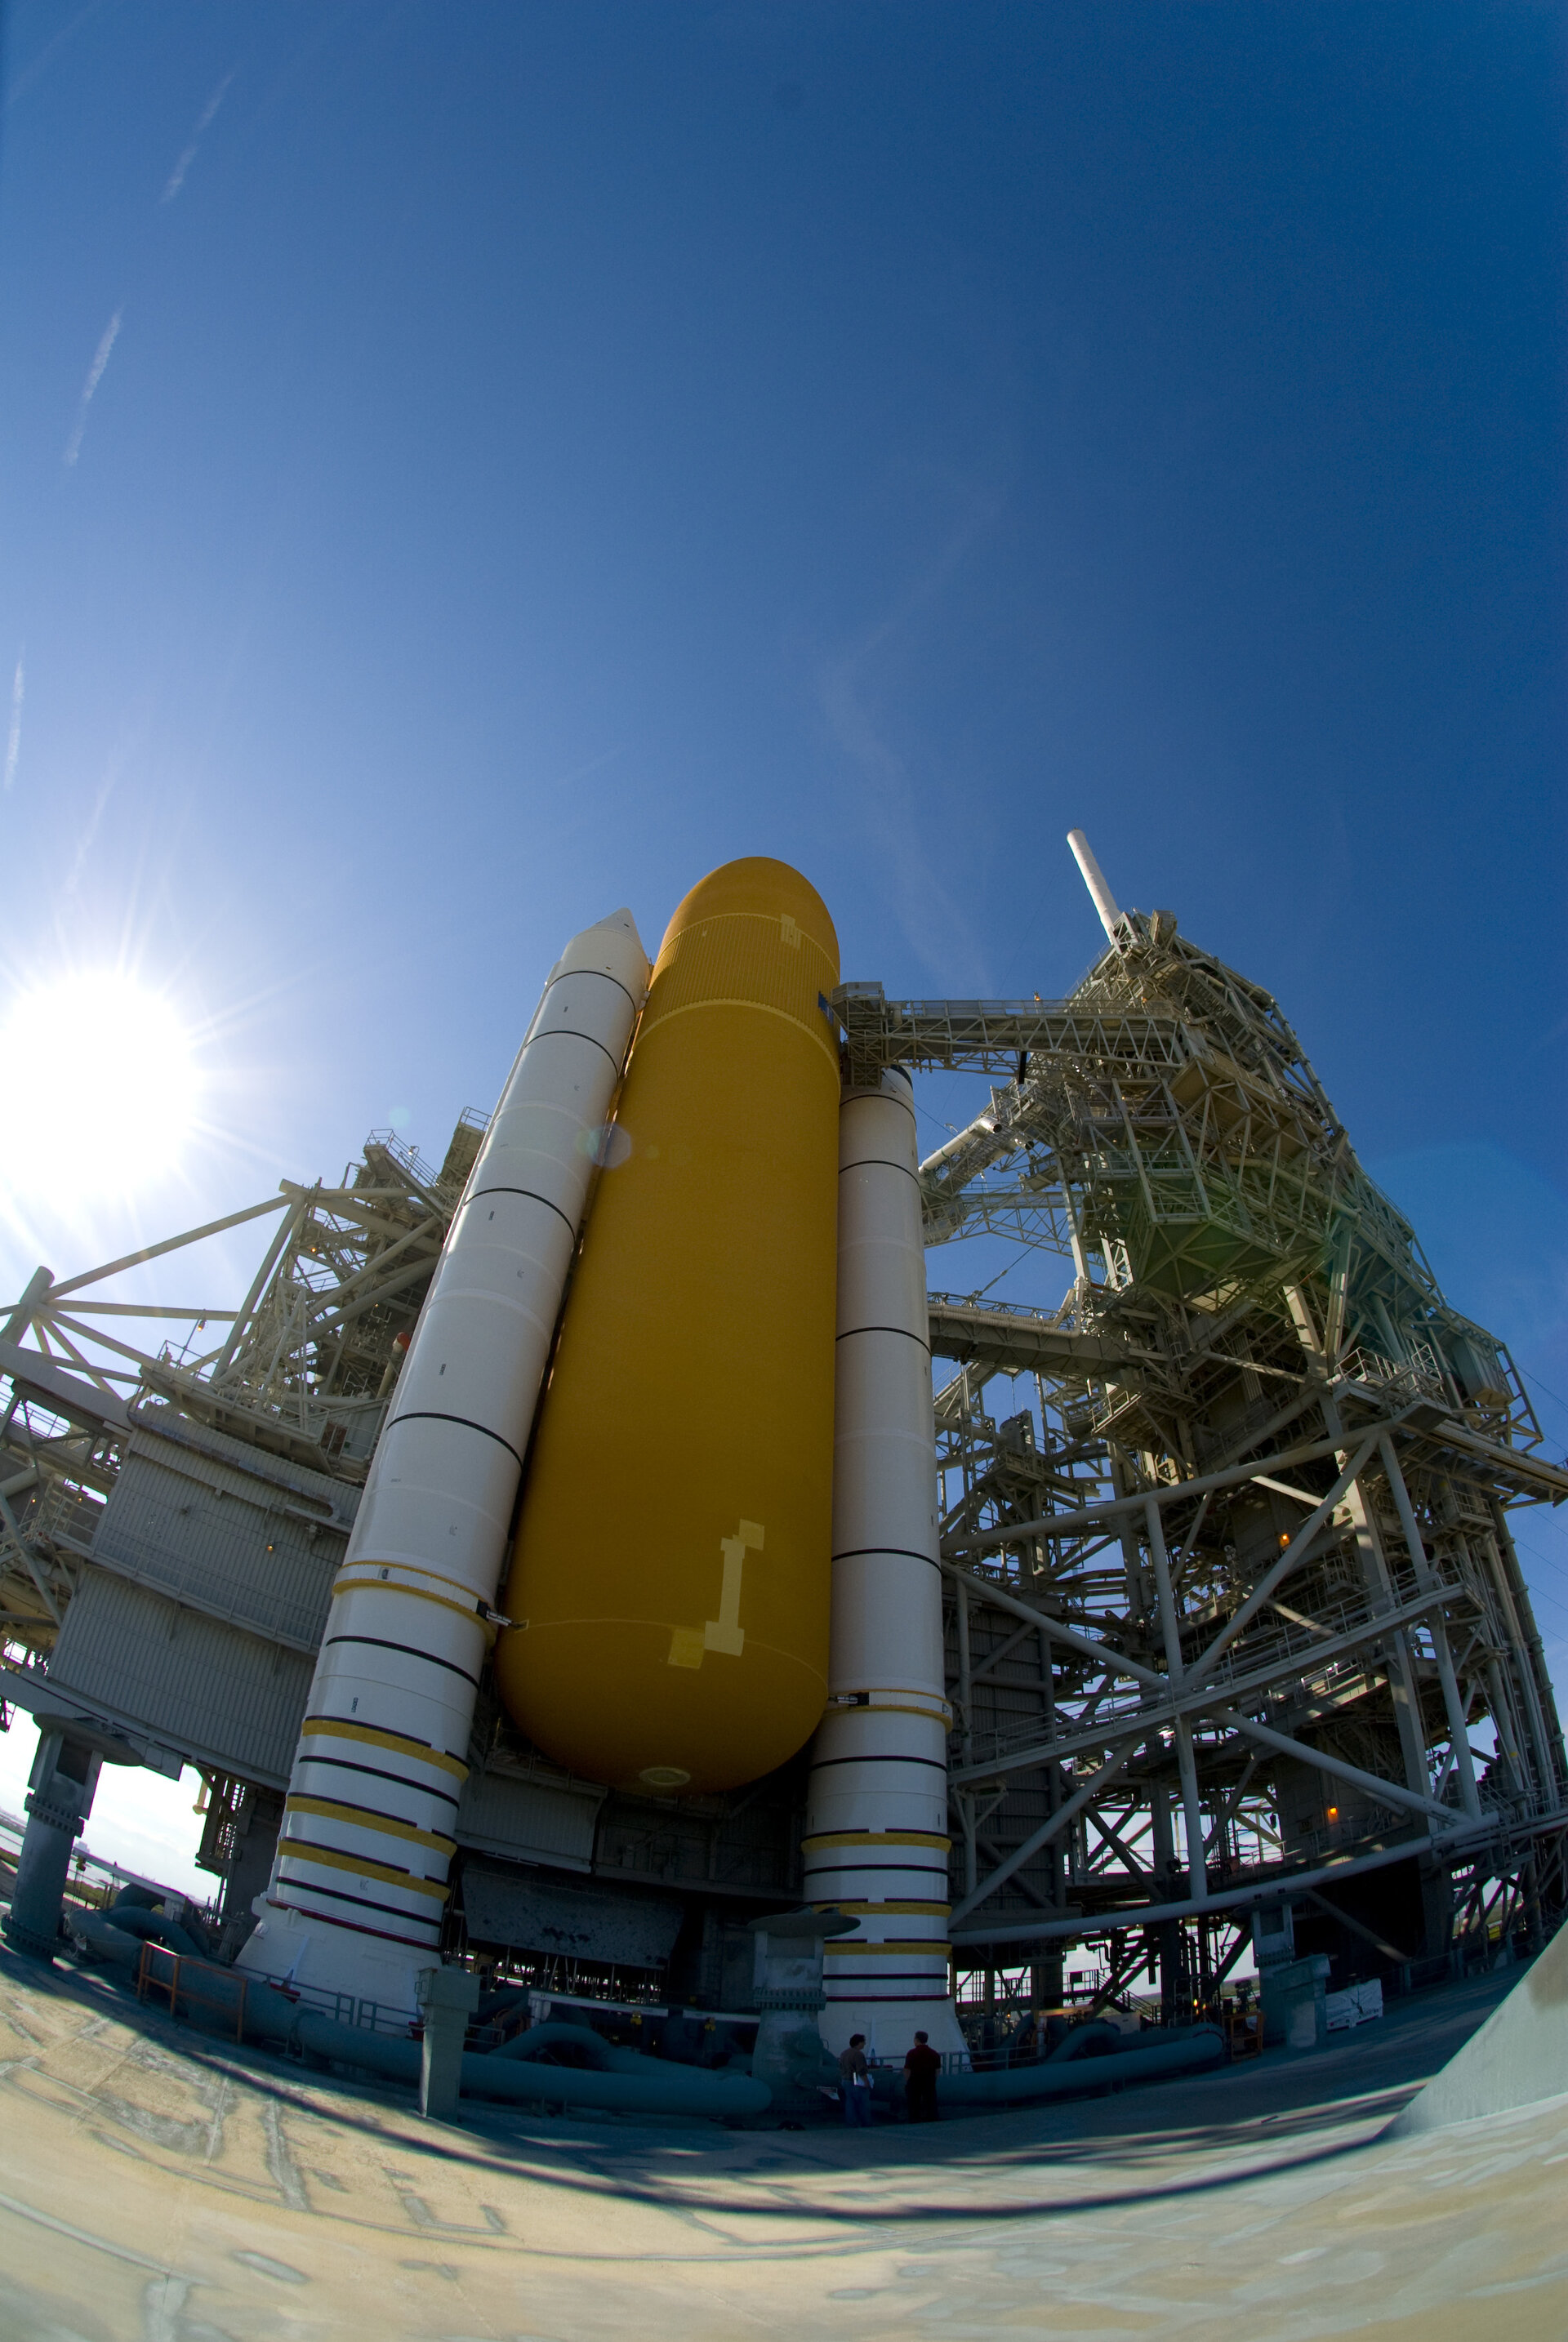 NASA's Space Shuttle Atlantis stands on the launch pad ready to carry the European Columbus laboratory to the ISS